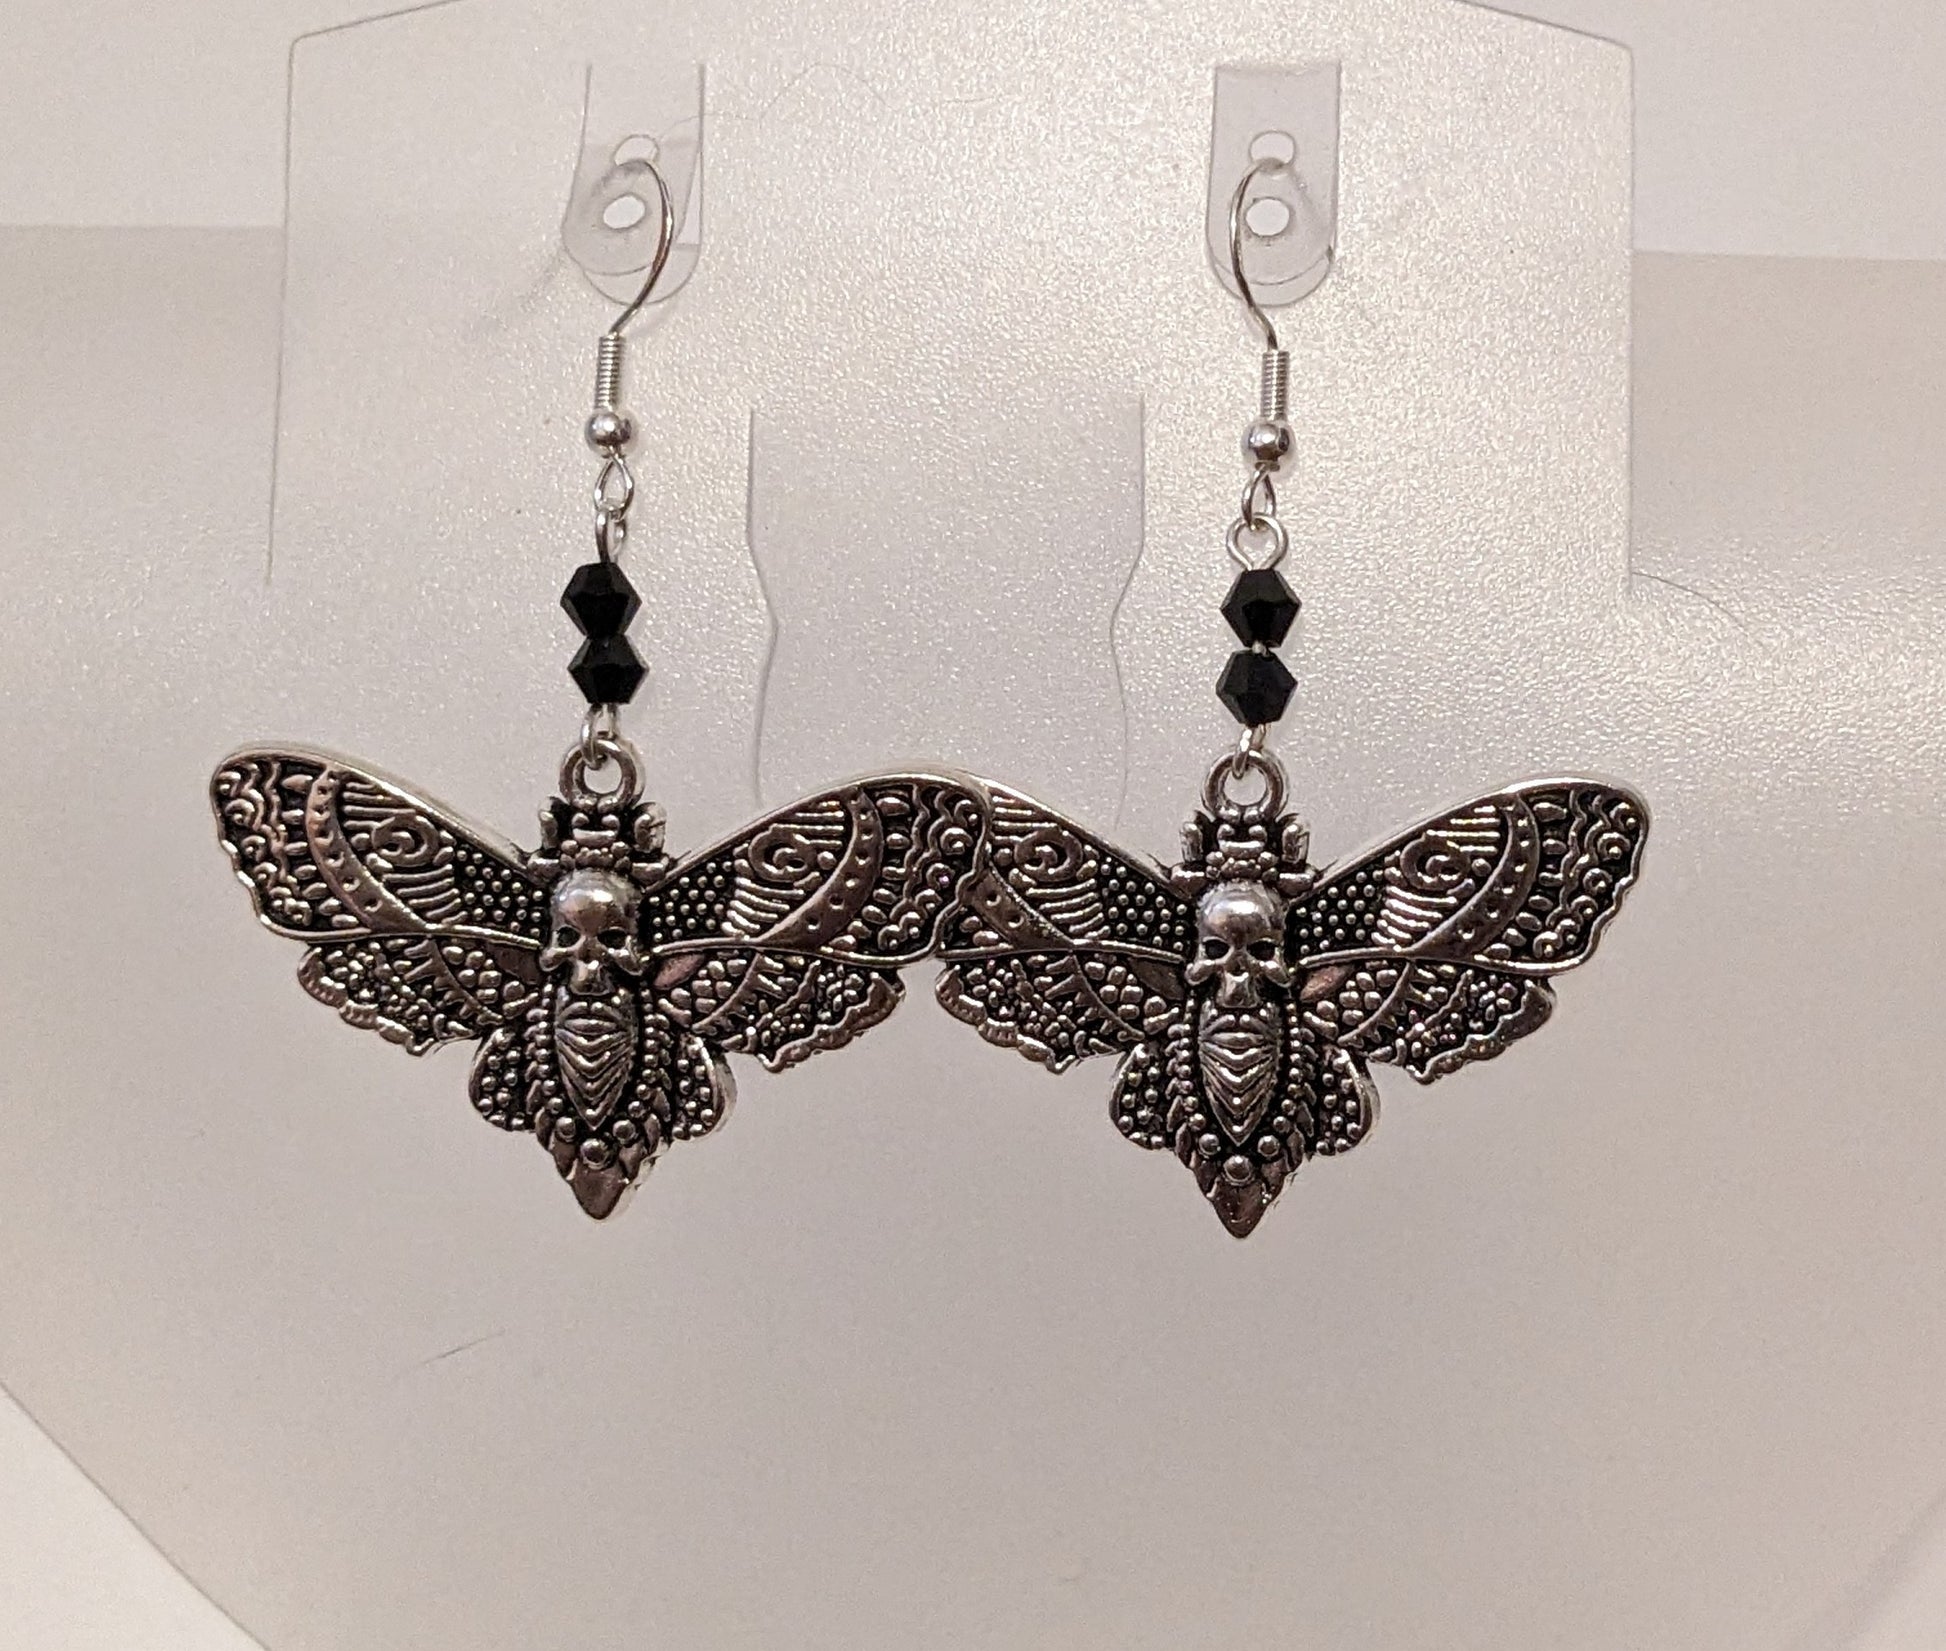 Close up of earrings showing the intricate details on the deaths-head moth charms. 